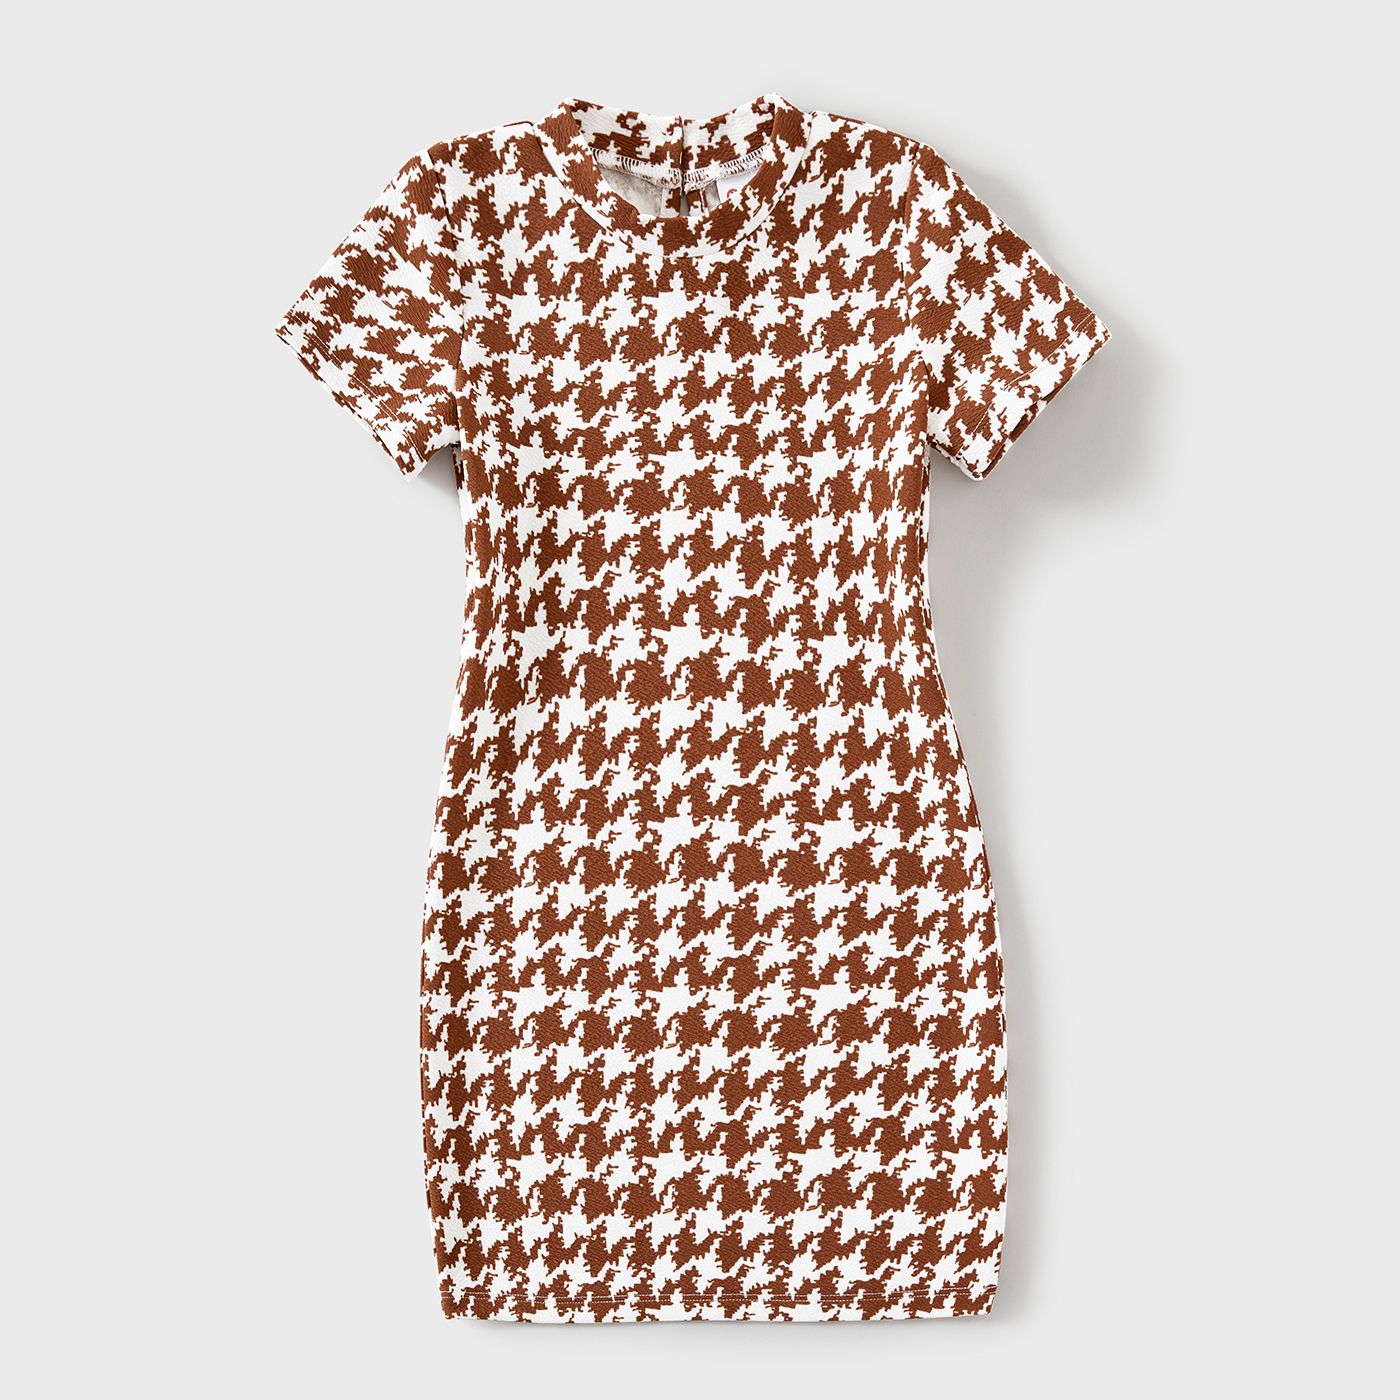 Family Matching Allover Houndstooth Print Round Neck Dresses And Short Sleeve Shirts Sets